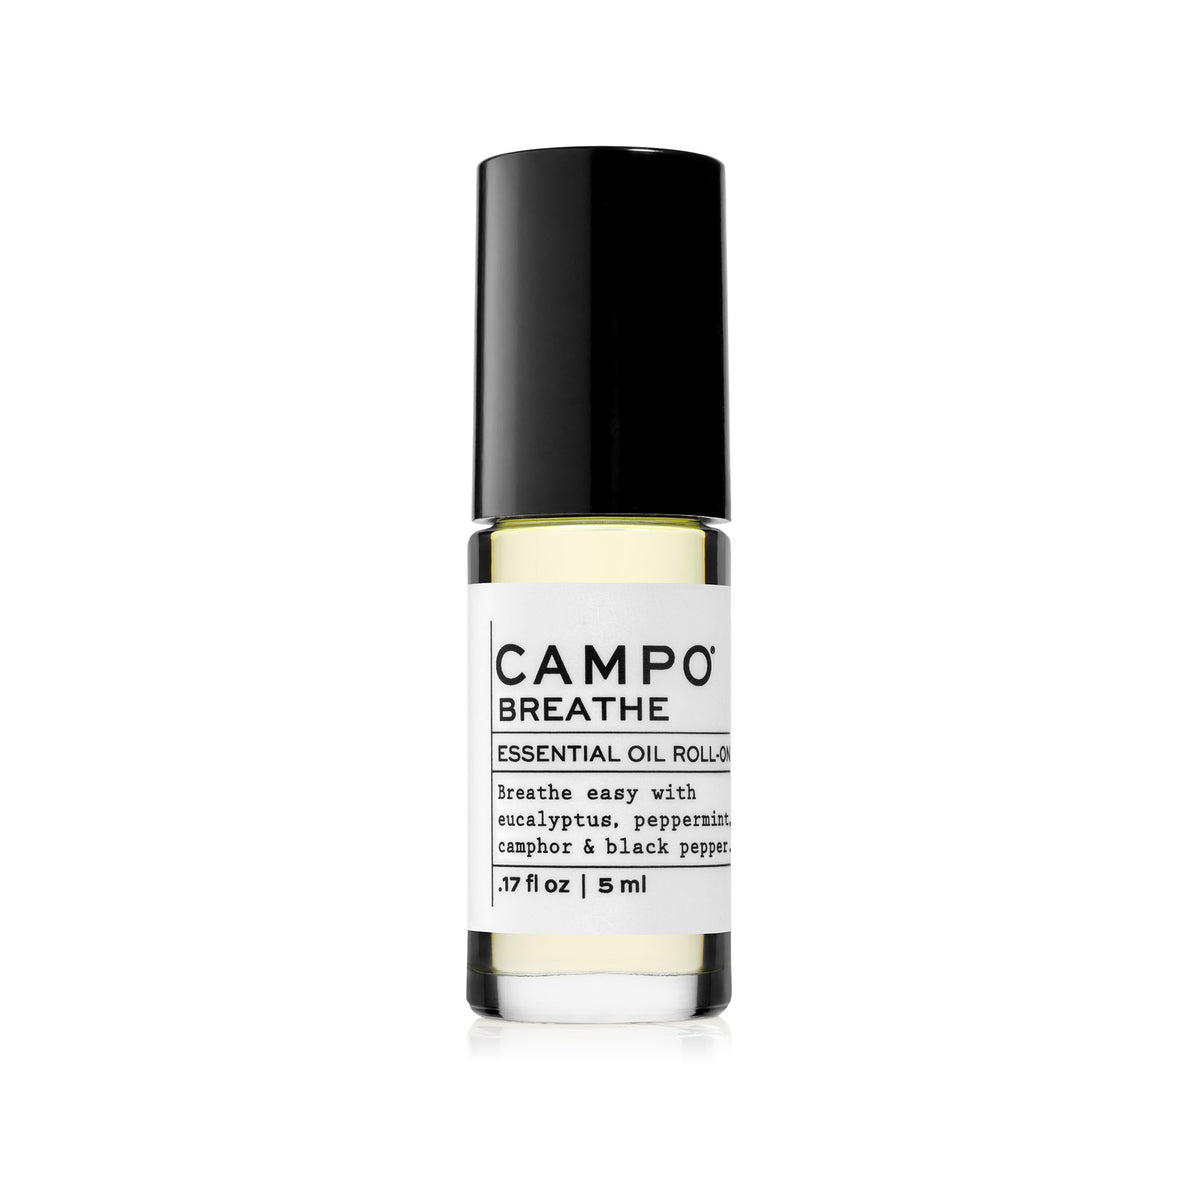 CAMPO Beauty 5 ml BREATHE Blend Essential Oil Roll-On. Breathe easy with this essential oil blend of eucalyptus, peppermint, camphor &amp; black pepper. Blended with 100% natural beauty carrier oils. Jet set and ready to roll. 